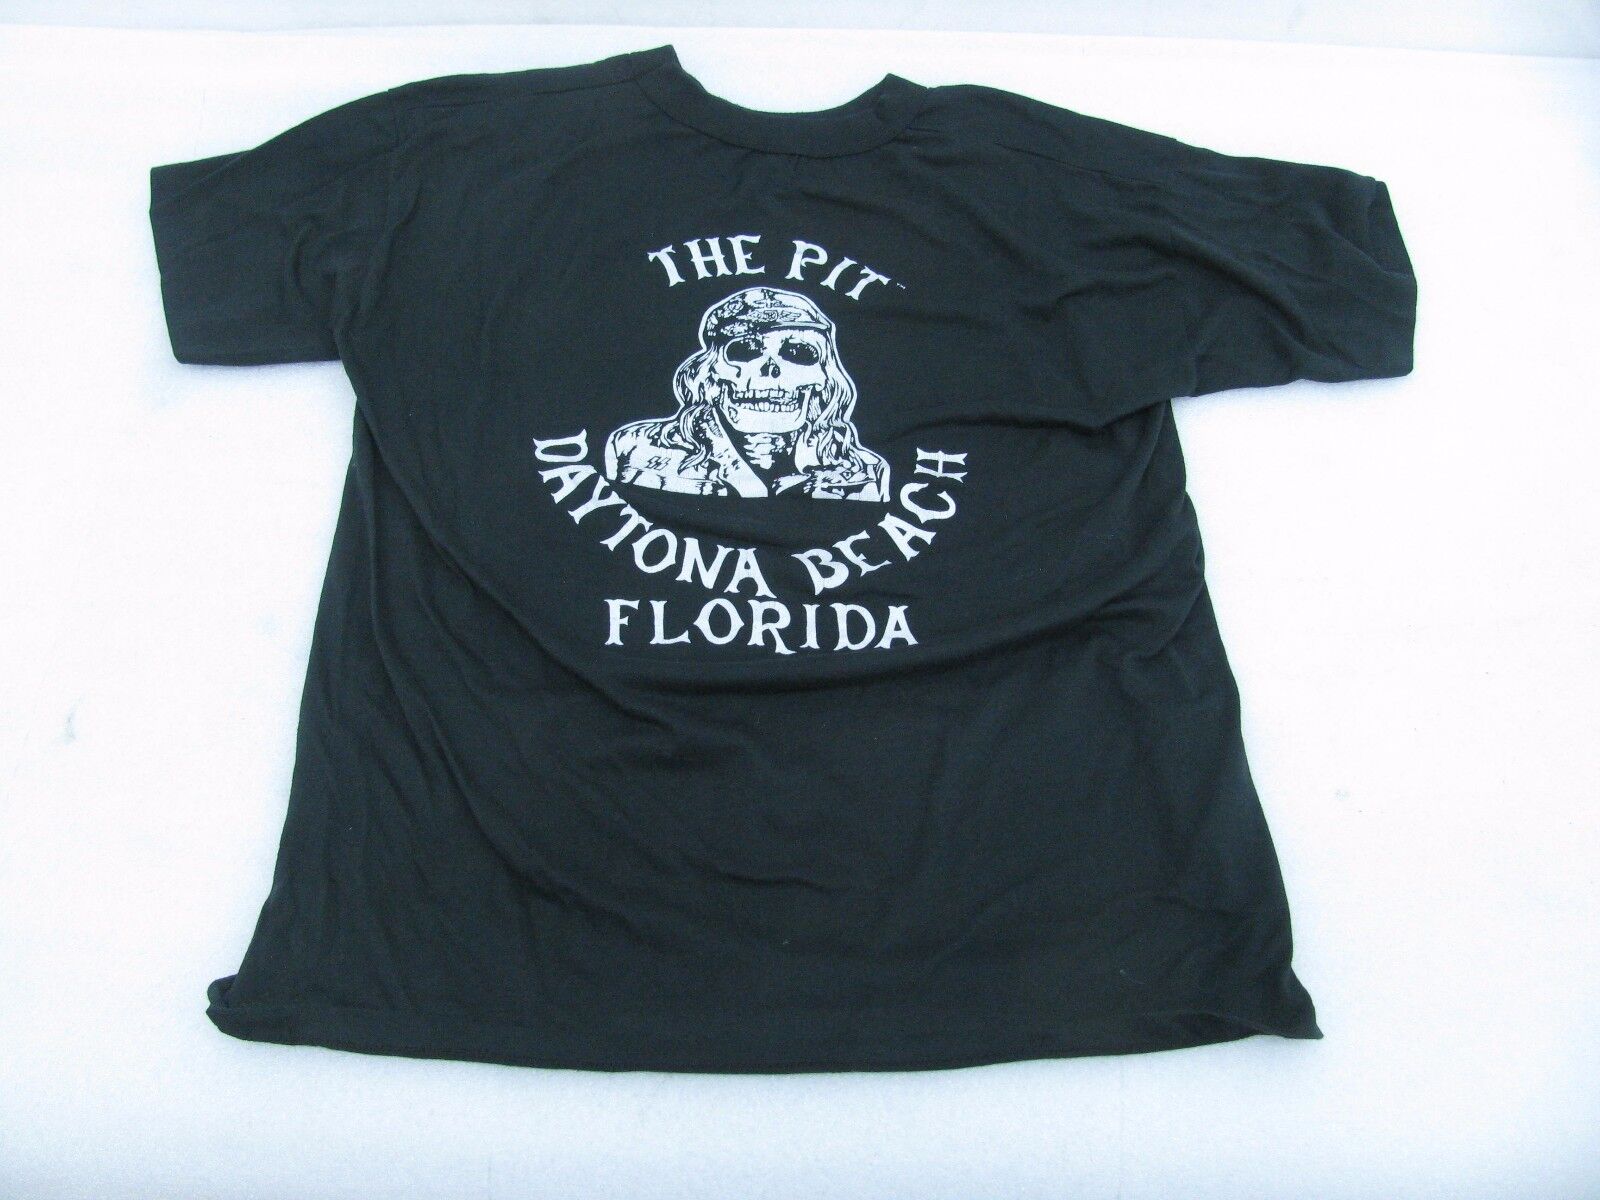 The Pit Daytona Beach Florida T Shirt If it\'s Got tits or wheels sooner or later